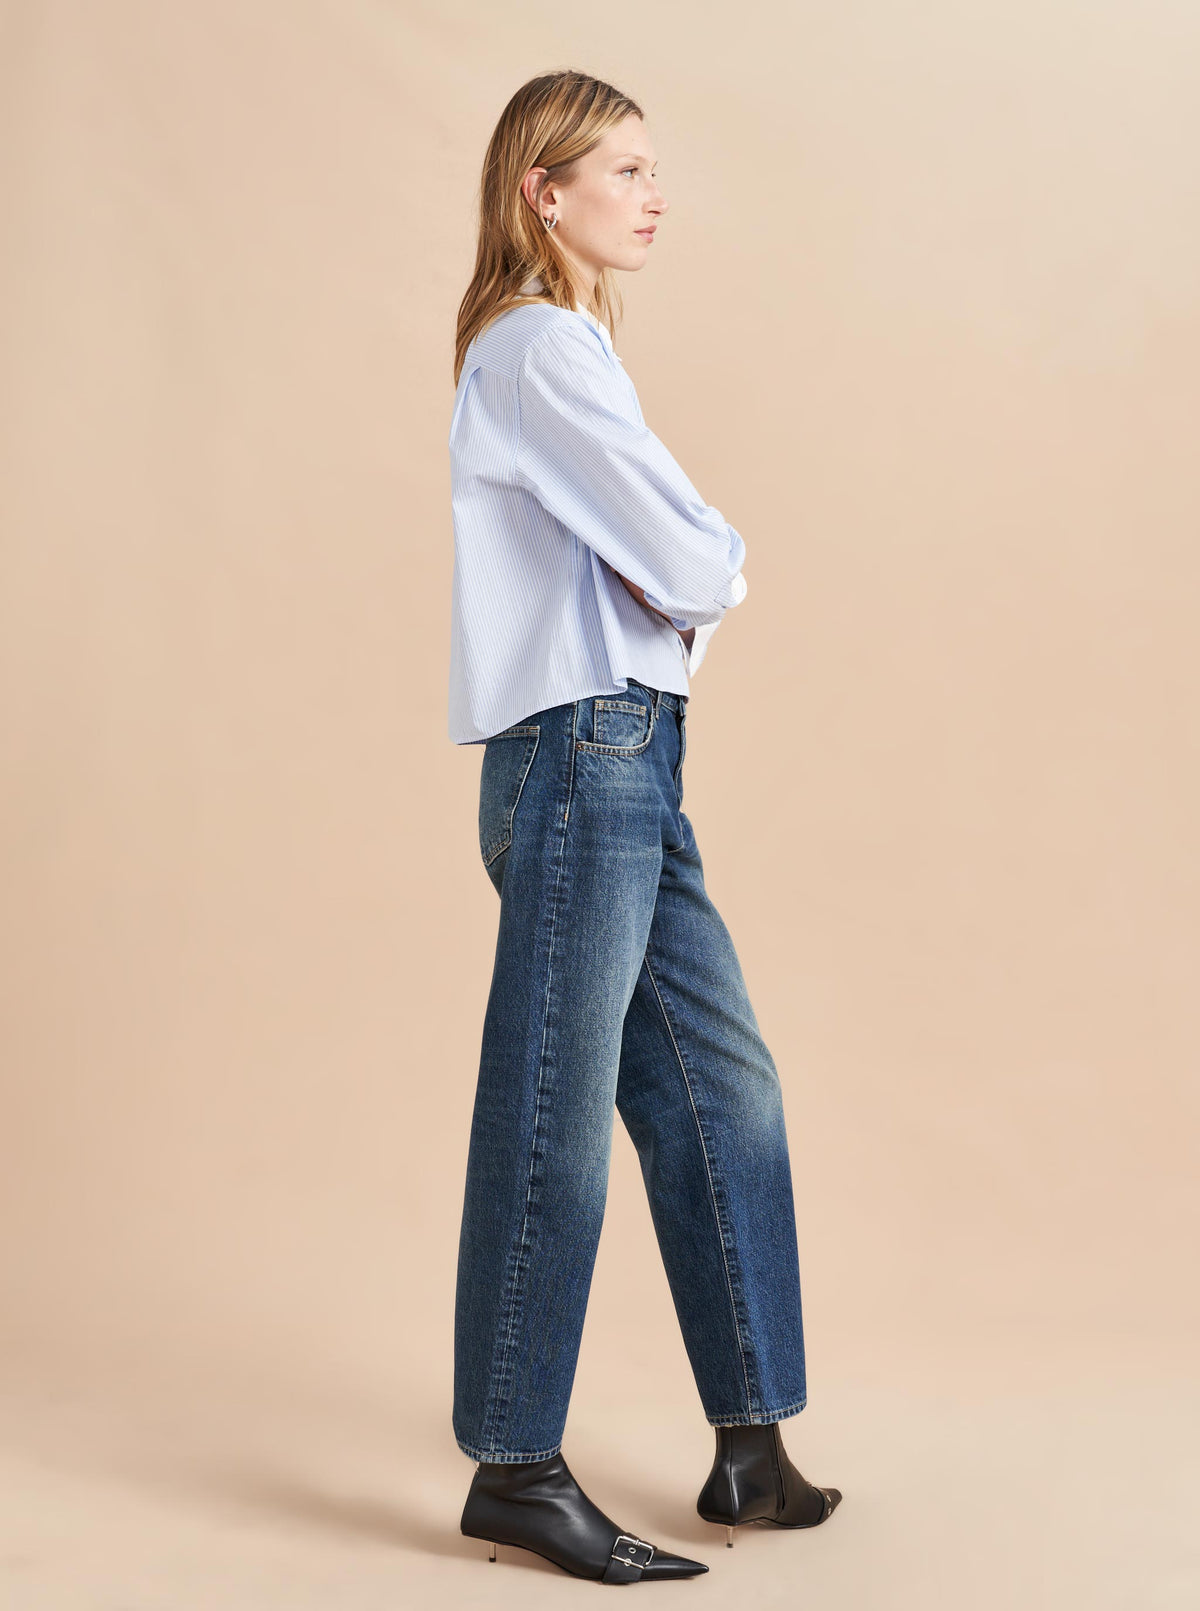 She's a little bit retro, a little bit nostalgic but totally modern. Our newest jean in non-stretch cotton with a slightly curved, barreled leg is a styling dream-it accentuates the waist and exaggerates the leg. Tuck in a tee or pair back to a cropped shirt or sweater but the fun is deciding which shoe to show off.